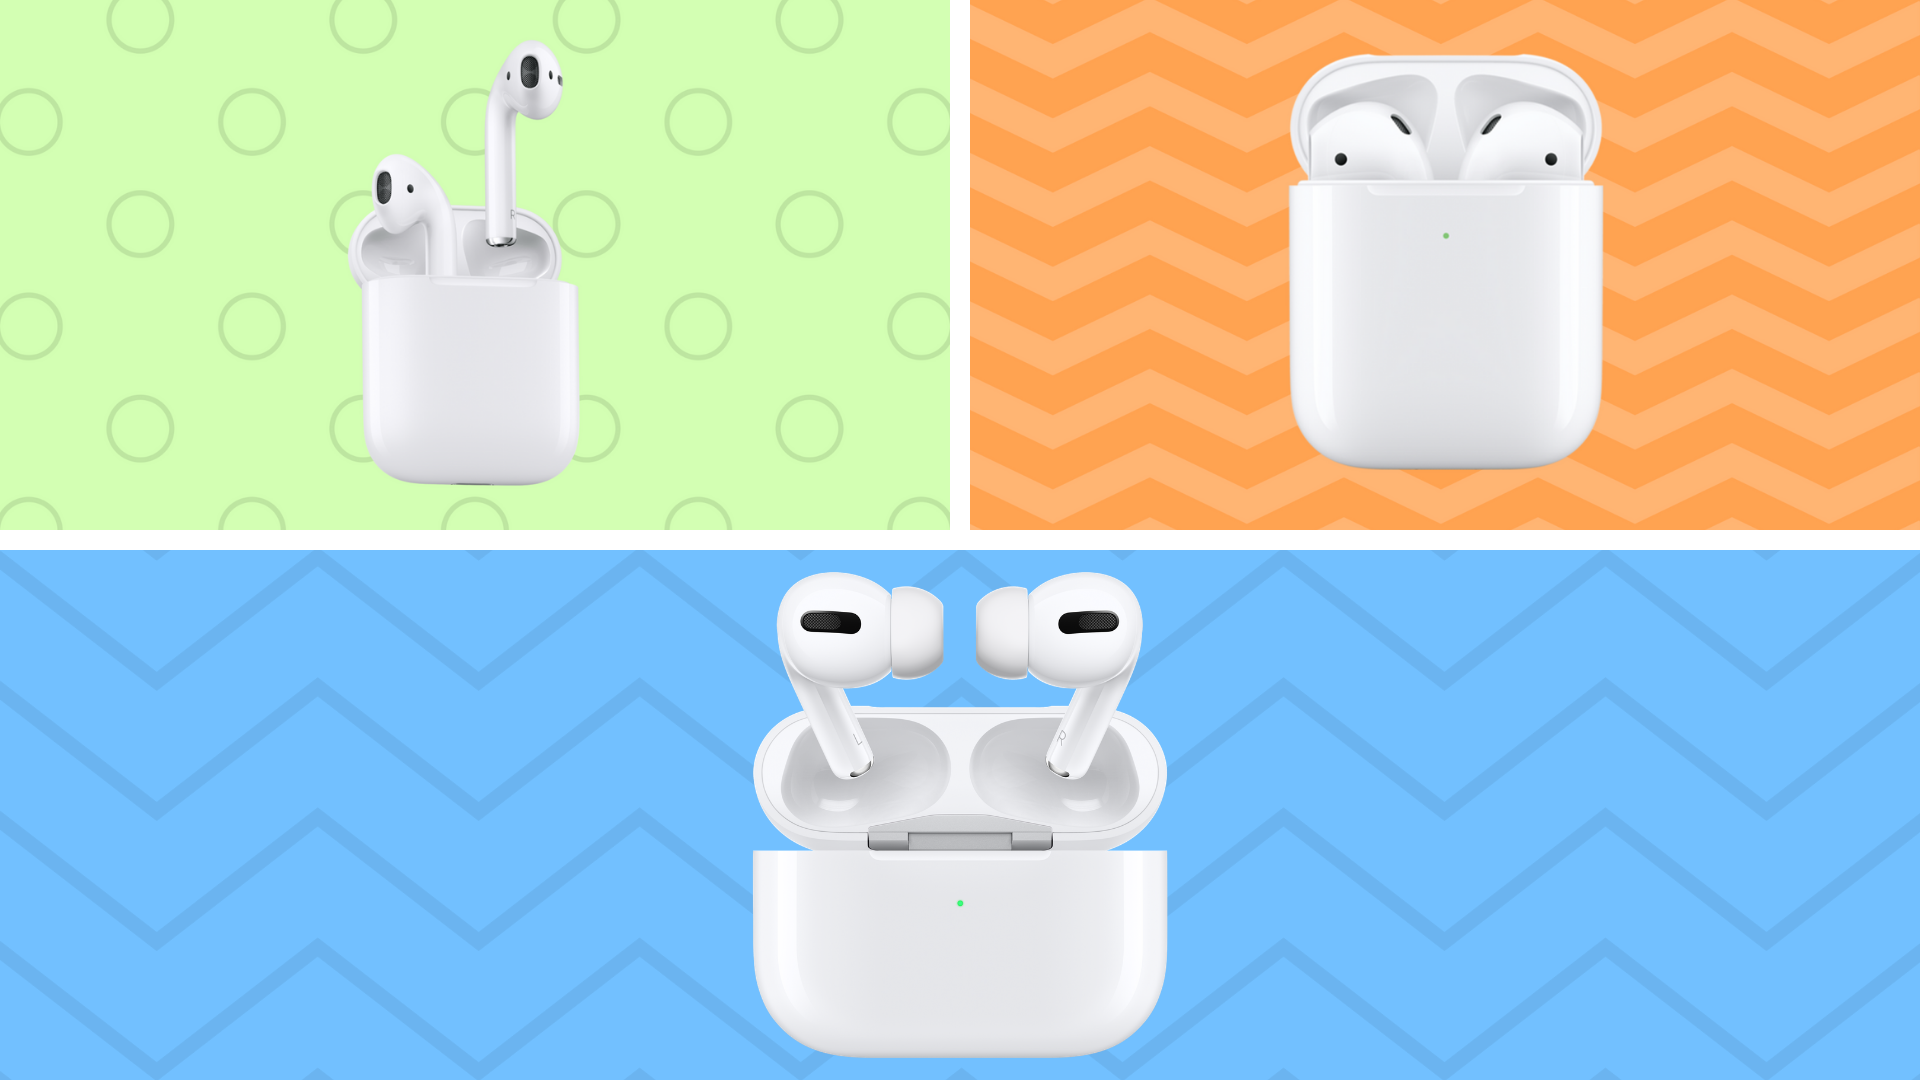 Apple AirPods and Apple AirPods Pro are on sale on Amazon